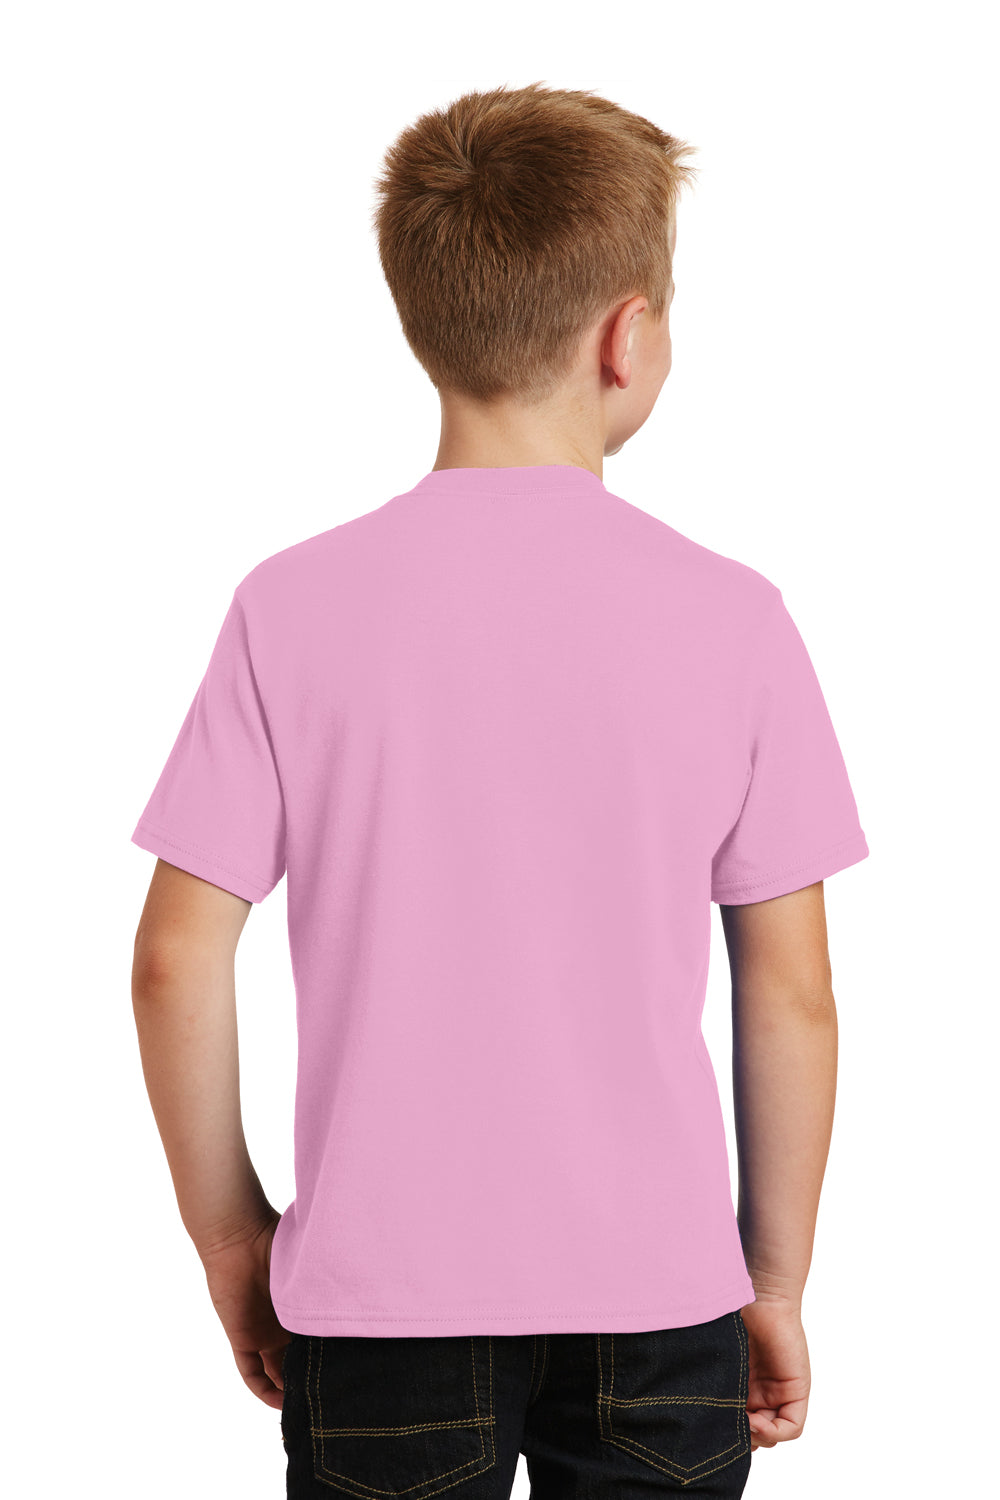 Port & Company PC450Y Youth Fan Favorite Short Sleeve Crewneck T-Shirt Candy Pink Back